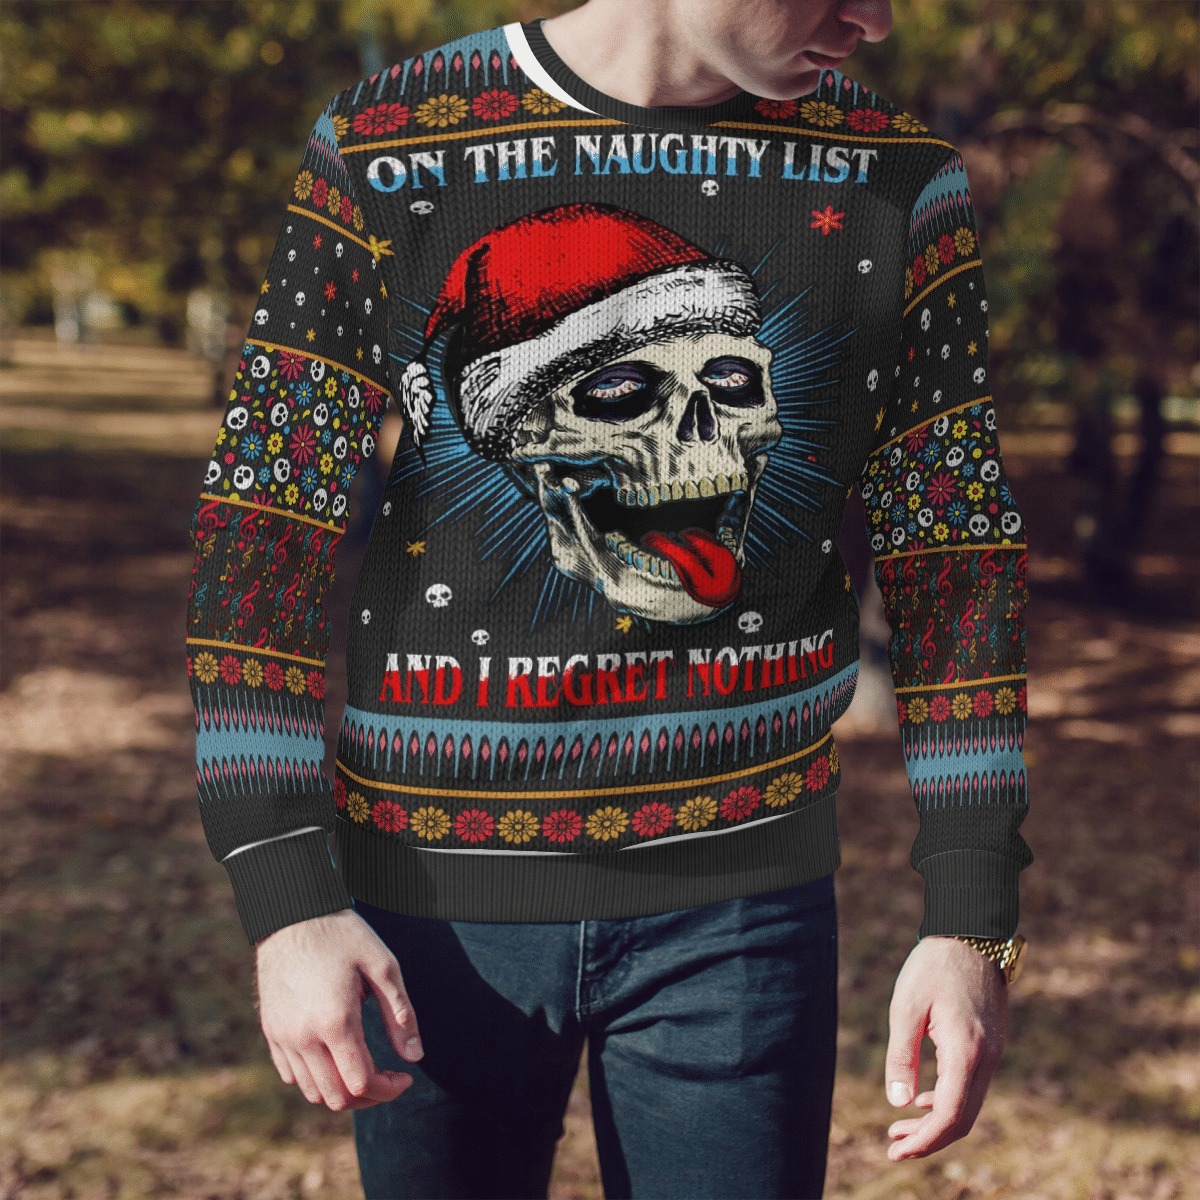 NEW Oh the naughty list and i regret nothing skull christmas sweater, Hoodie 3